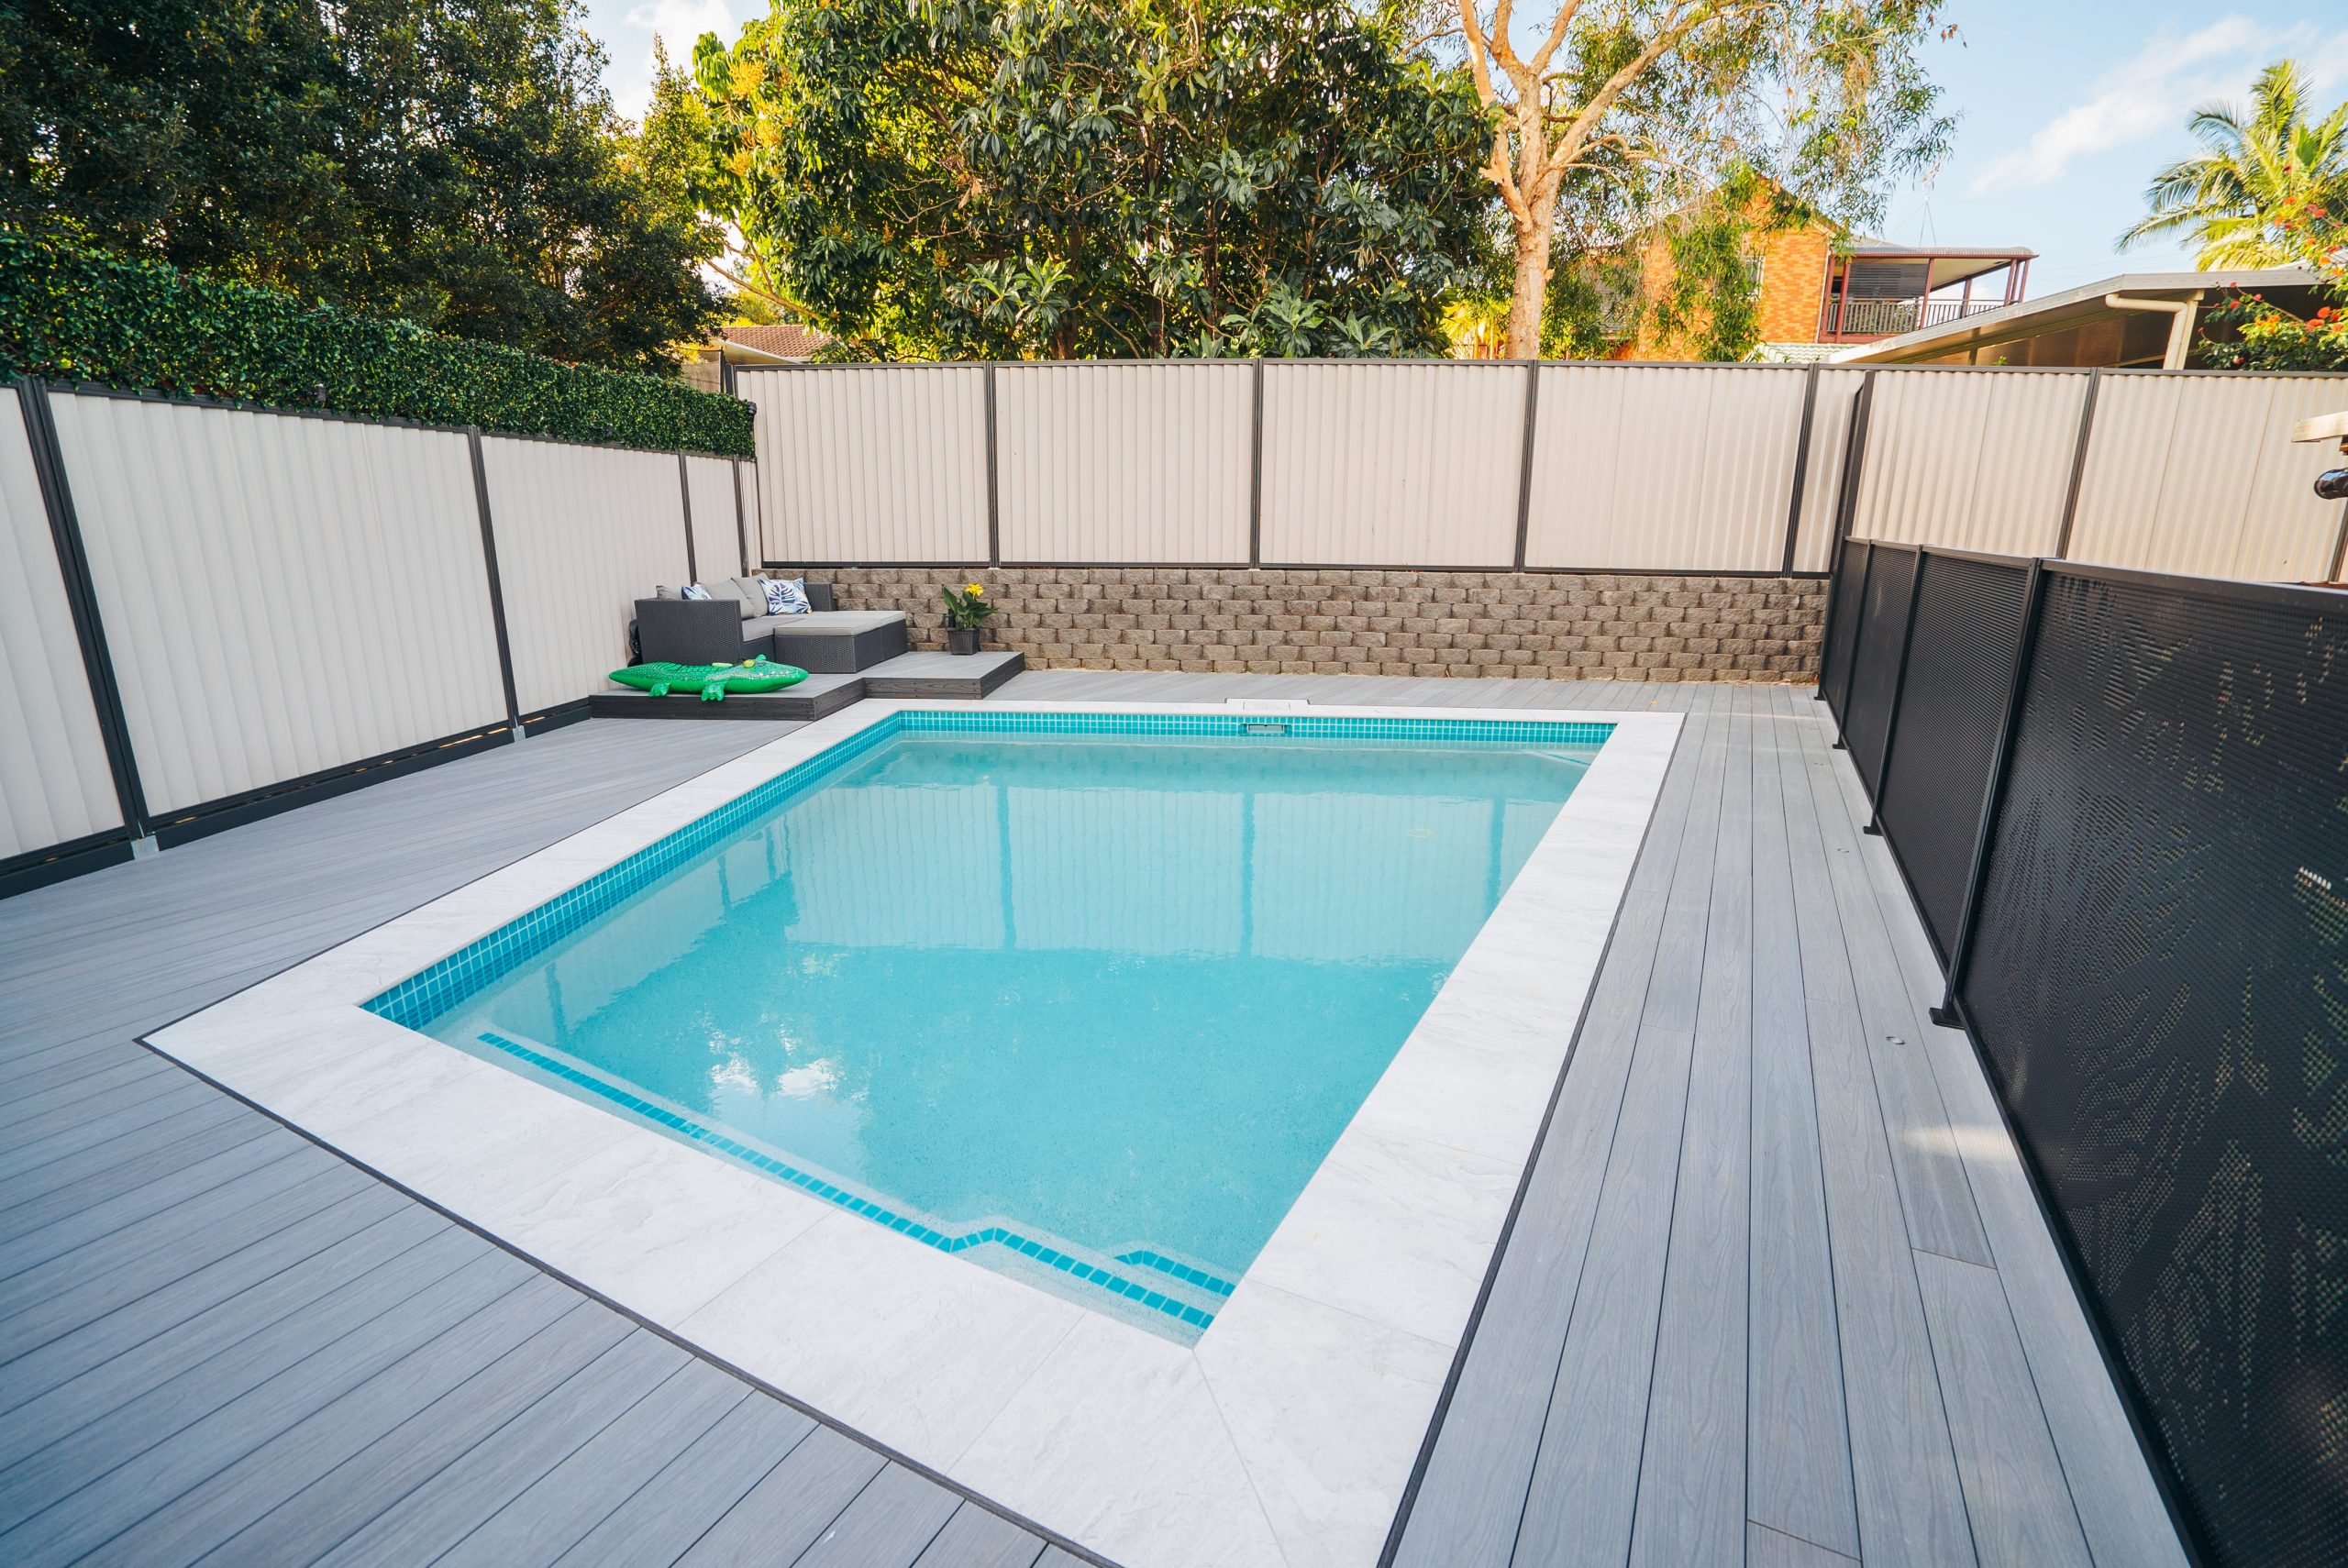 A composite decking surrounded pool